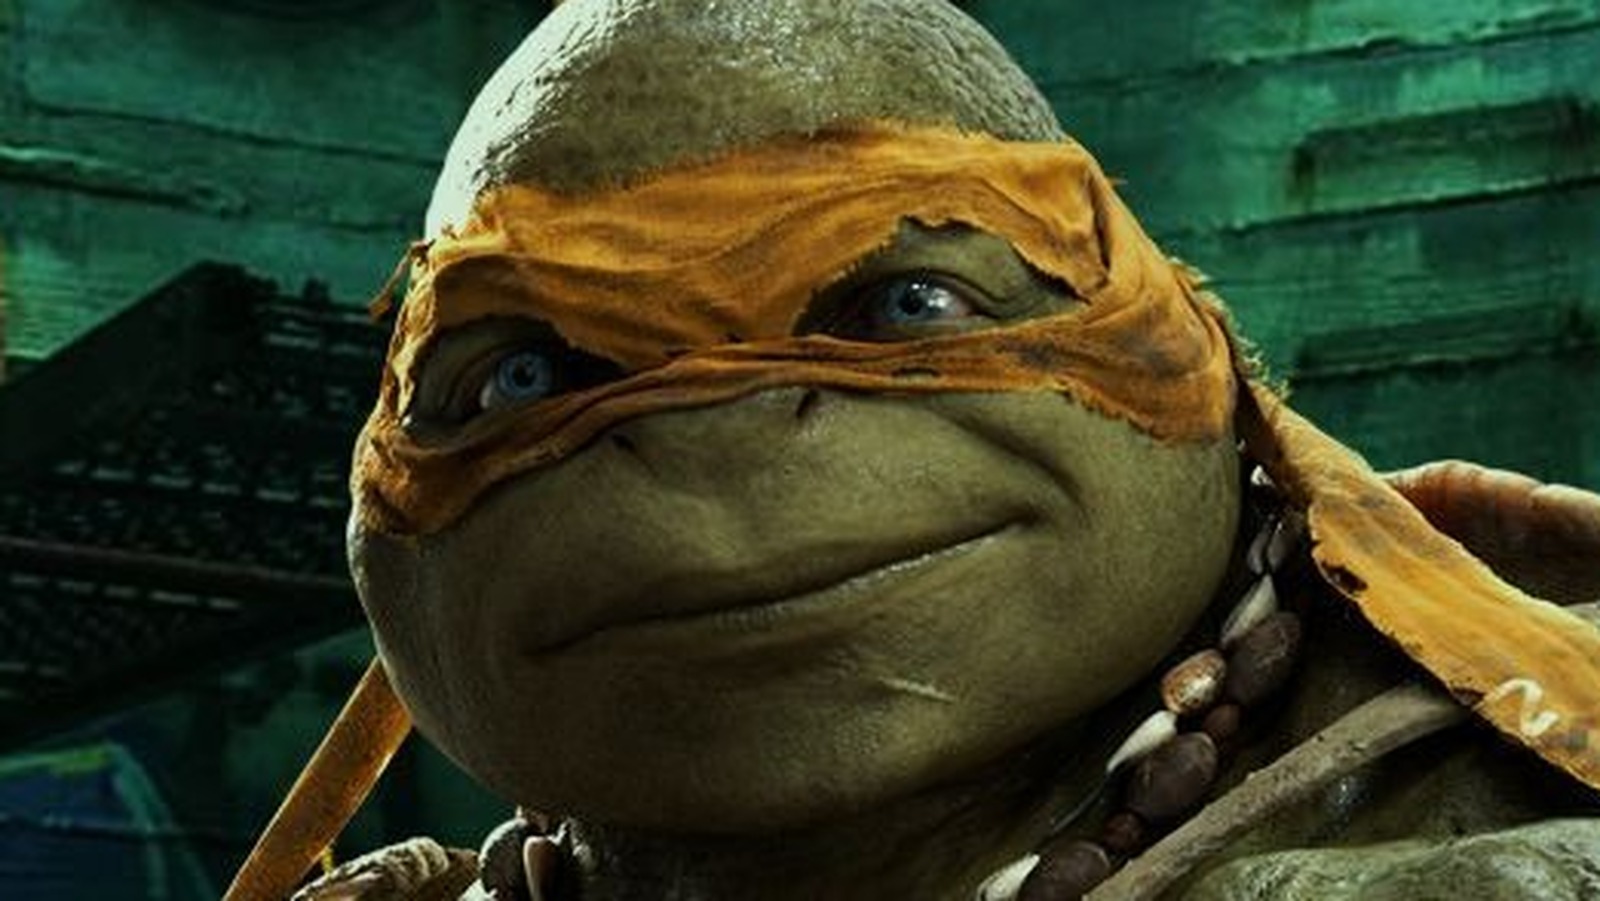 https://www.looper.com/img/gallery/every-incarnation-of-the-teenage-mutant-ninja-turtles-ranked-from-worst-to-best/l-intro-1645052061.jpg